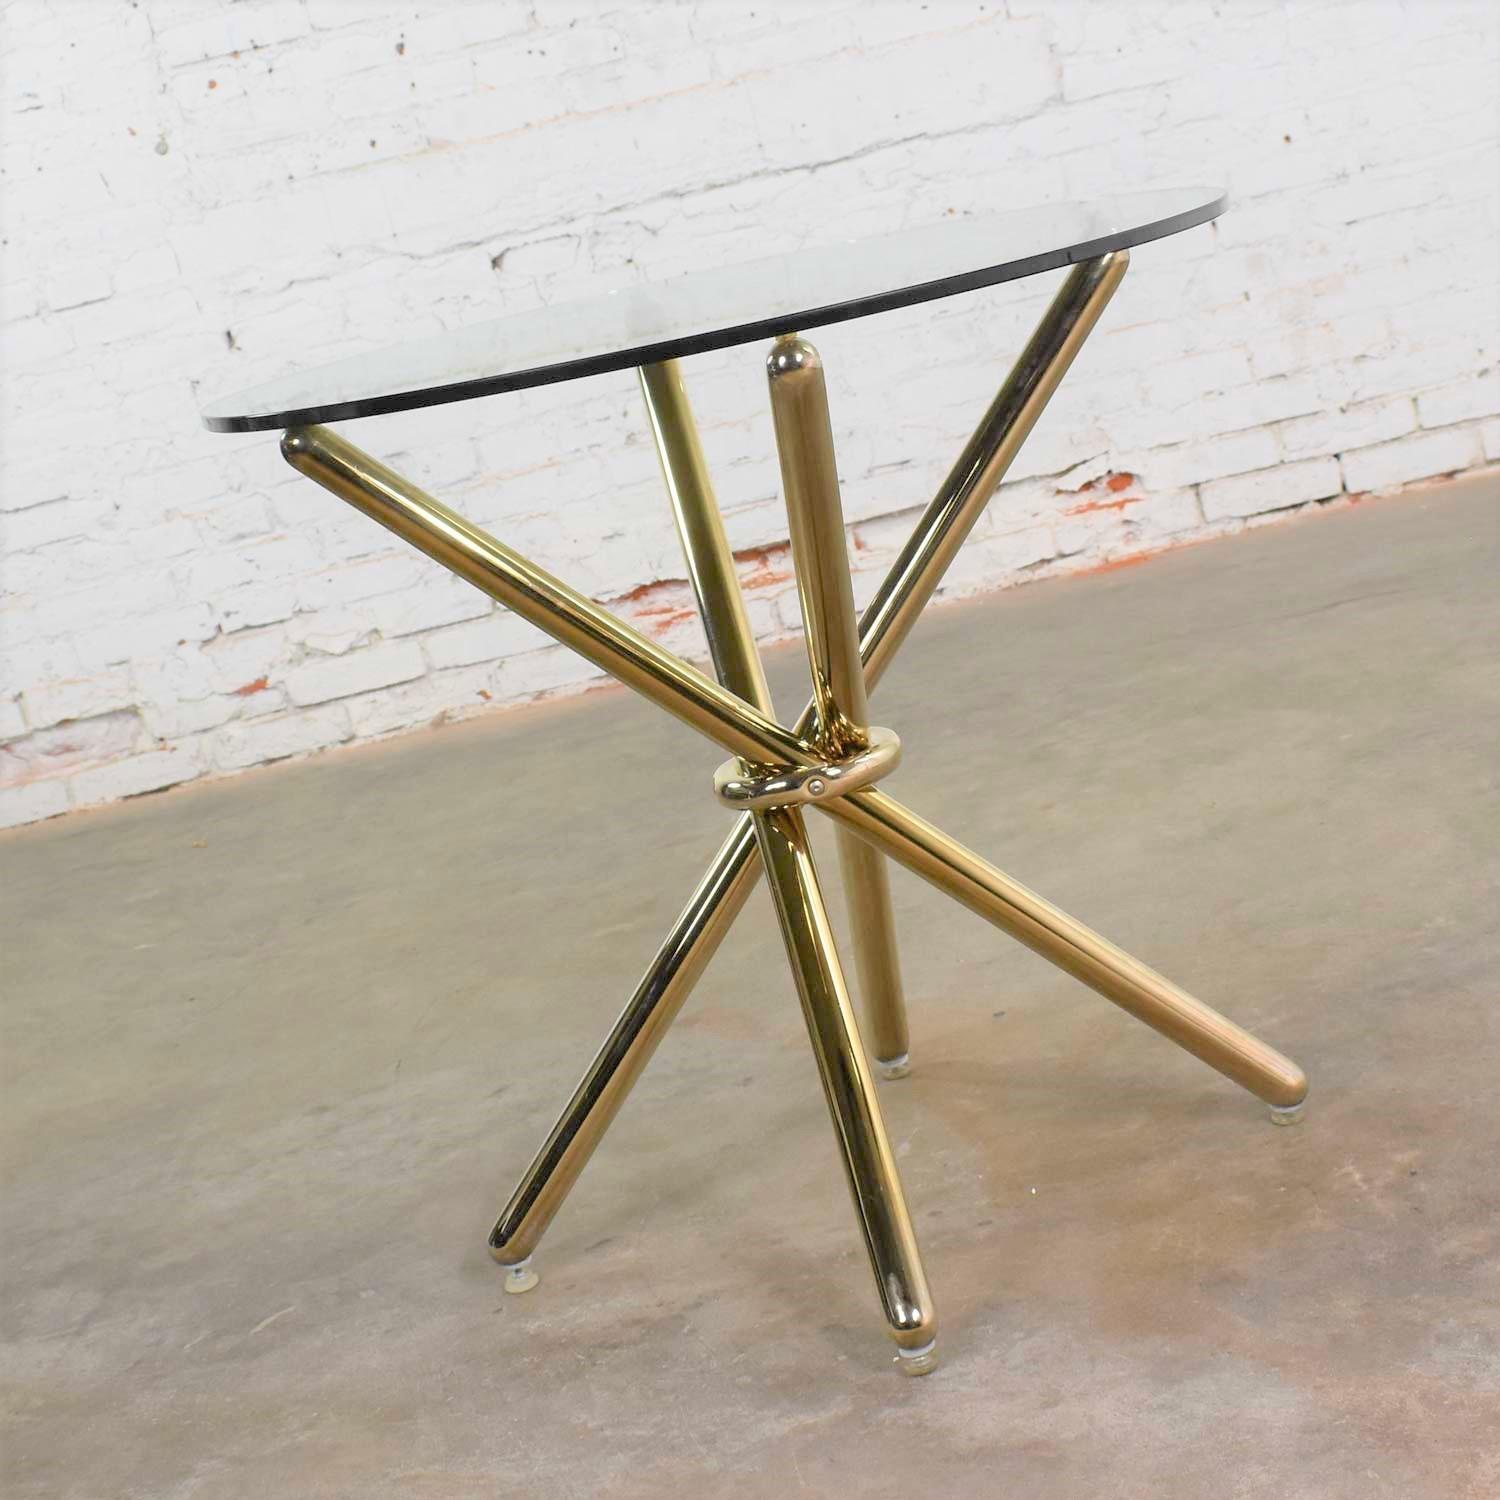 Vintage Modern Brass-Plated Jax Center or End Table with Round Glass Top 11